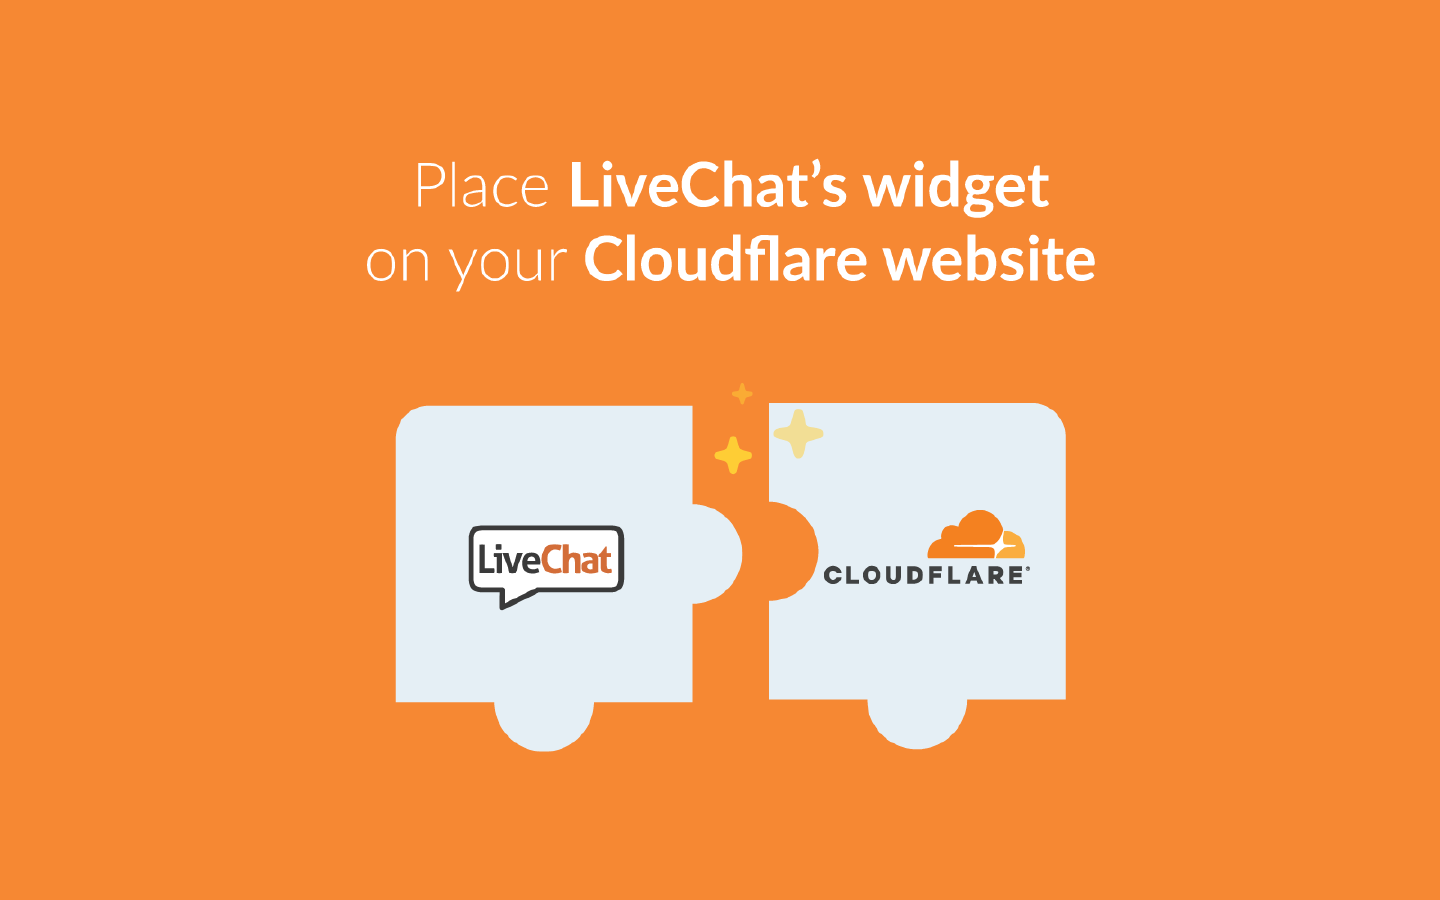 LiveChat's integration for Cloudflare